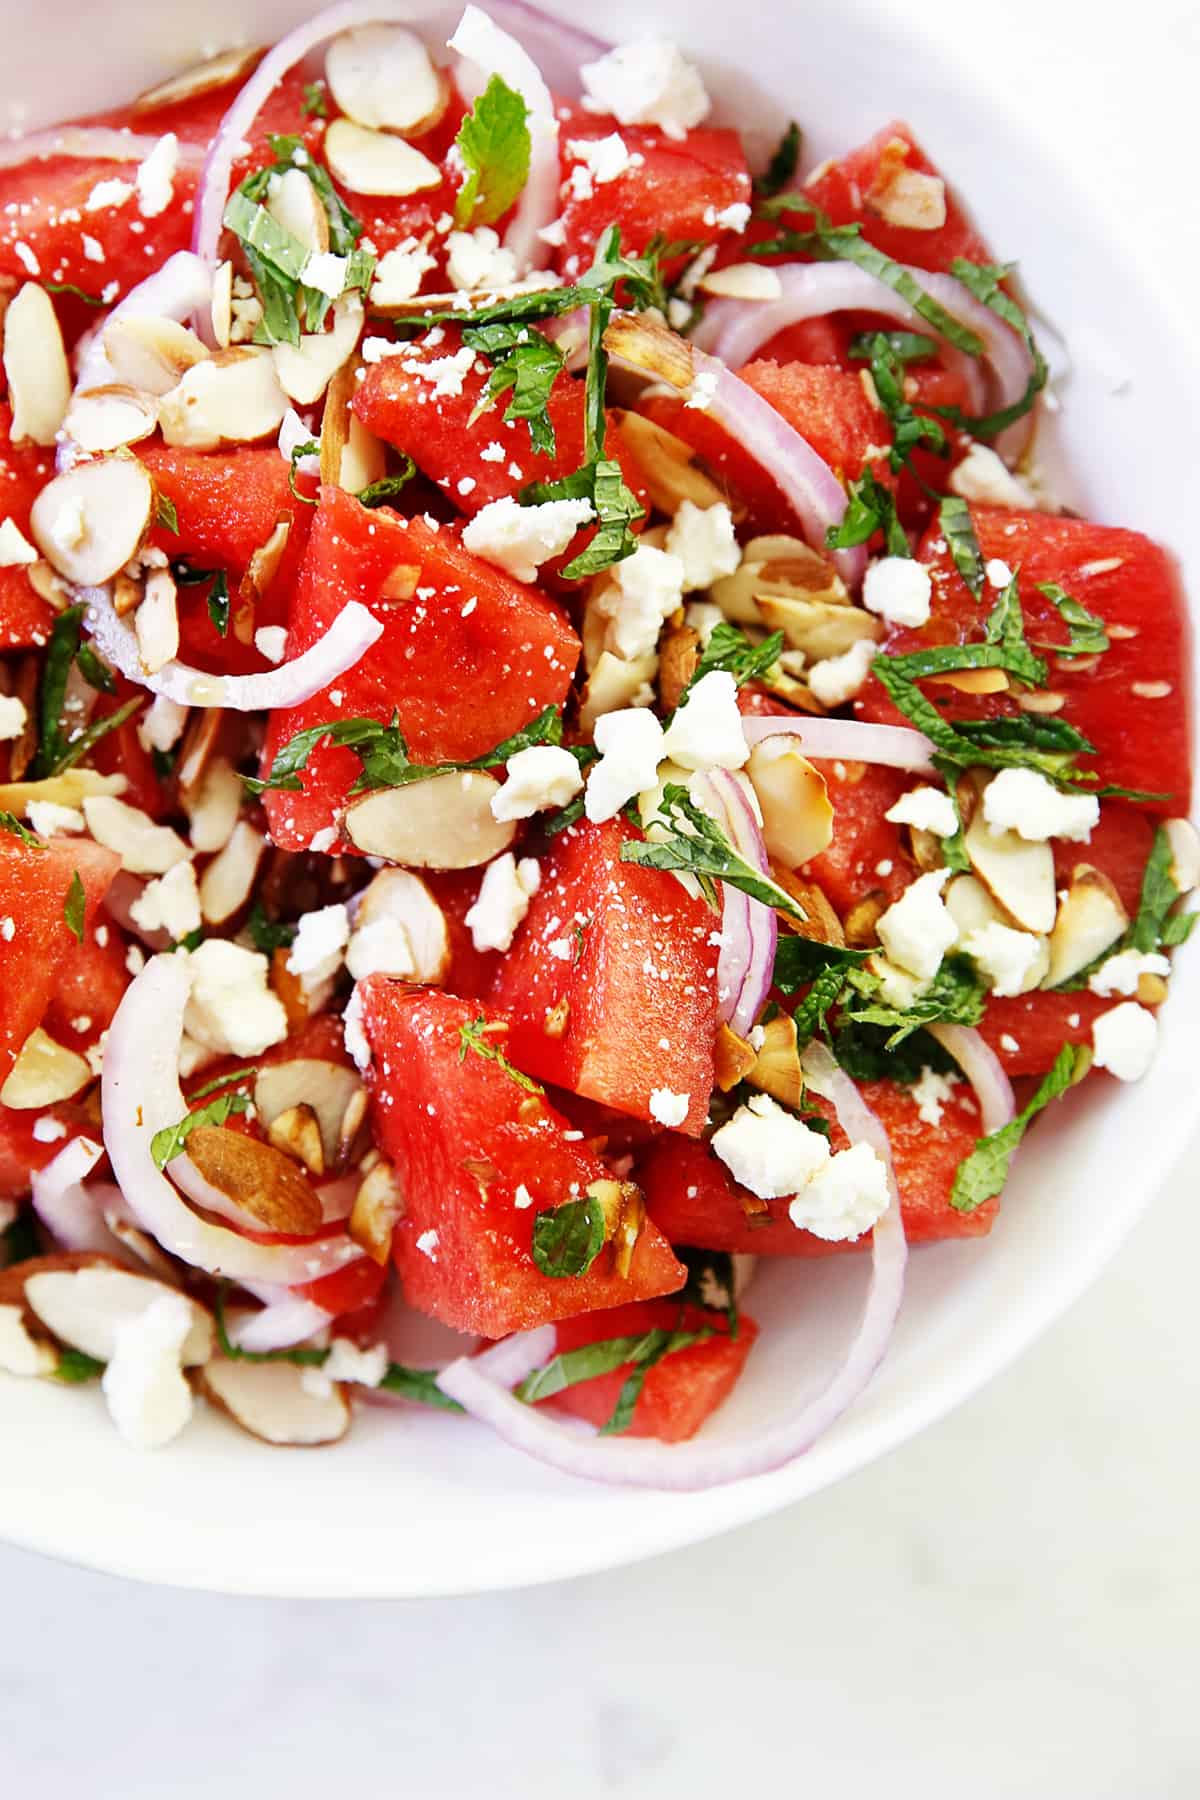 A bowl of watermelon salad with onions, herbs, cheese and nuts.